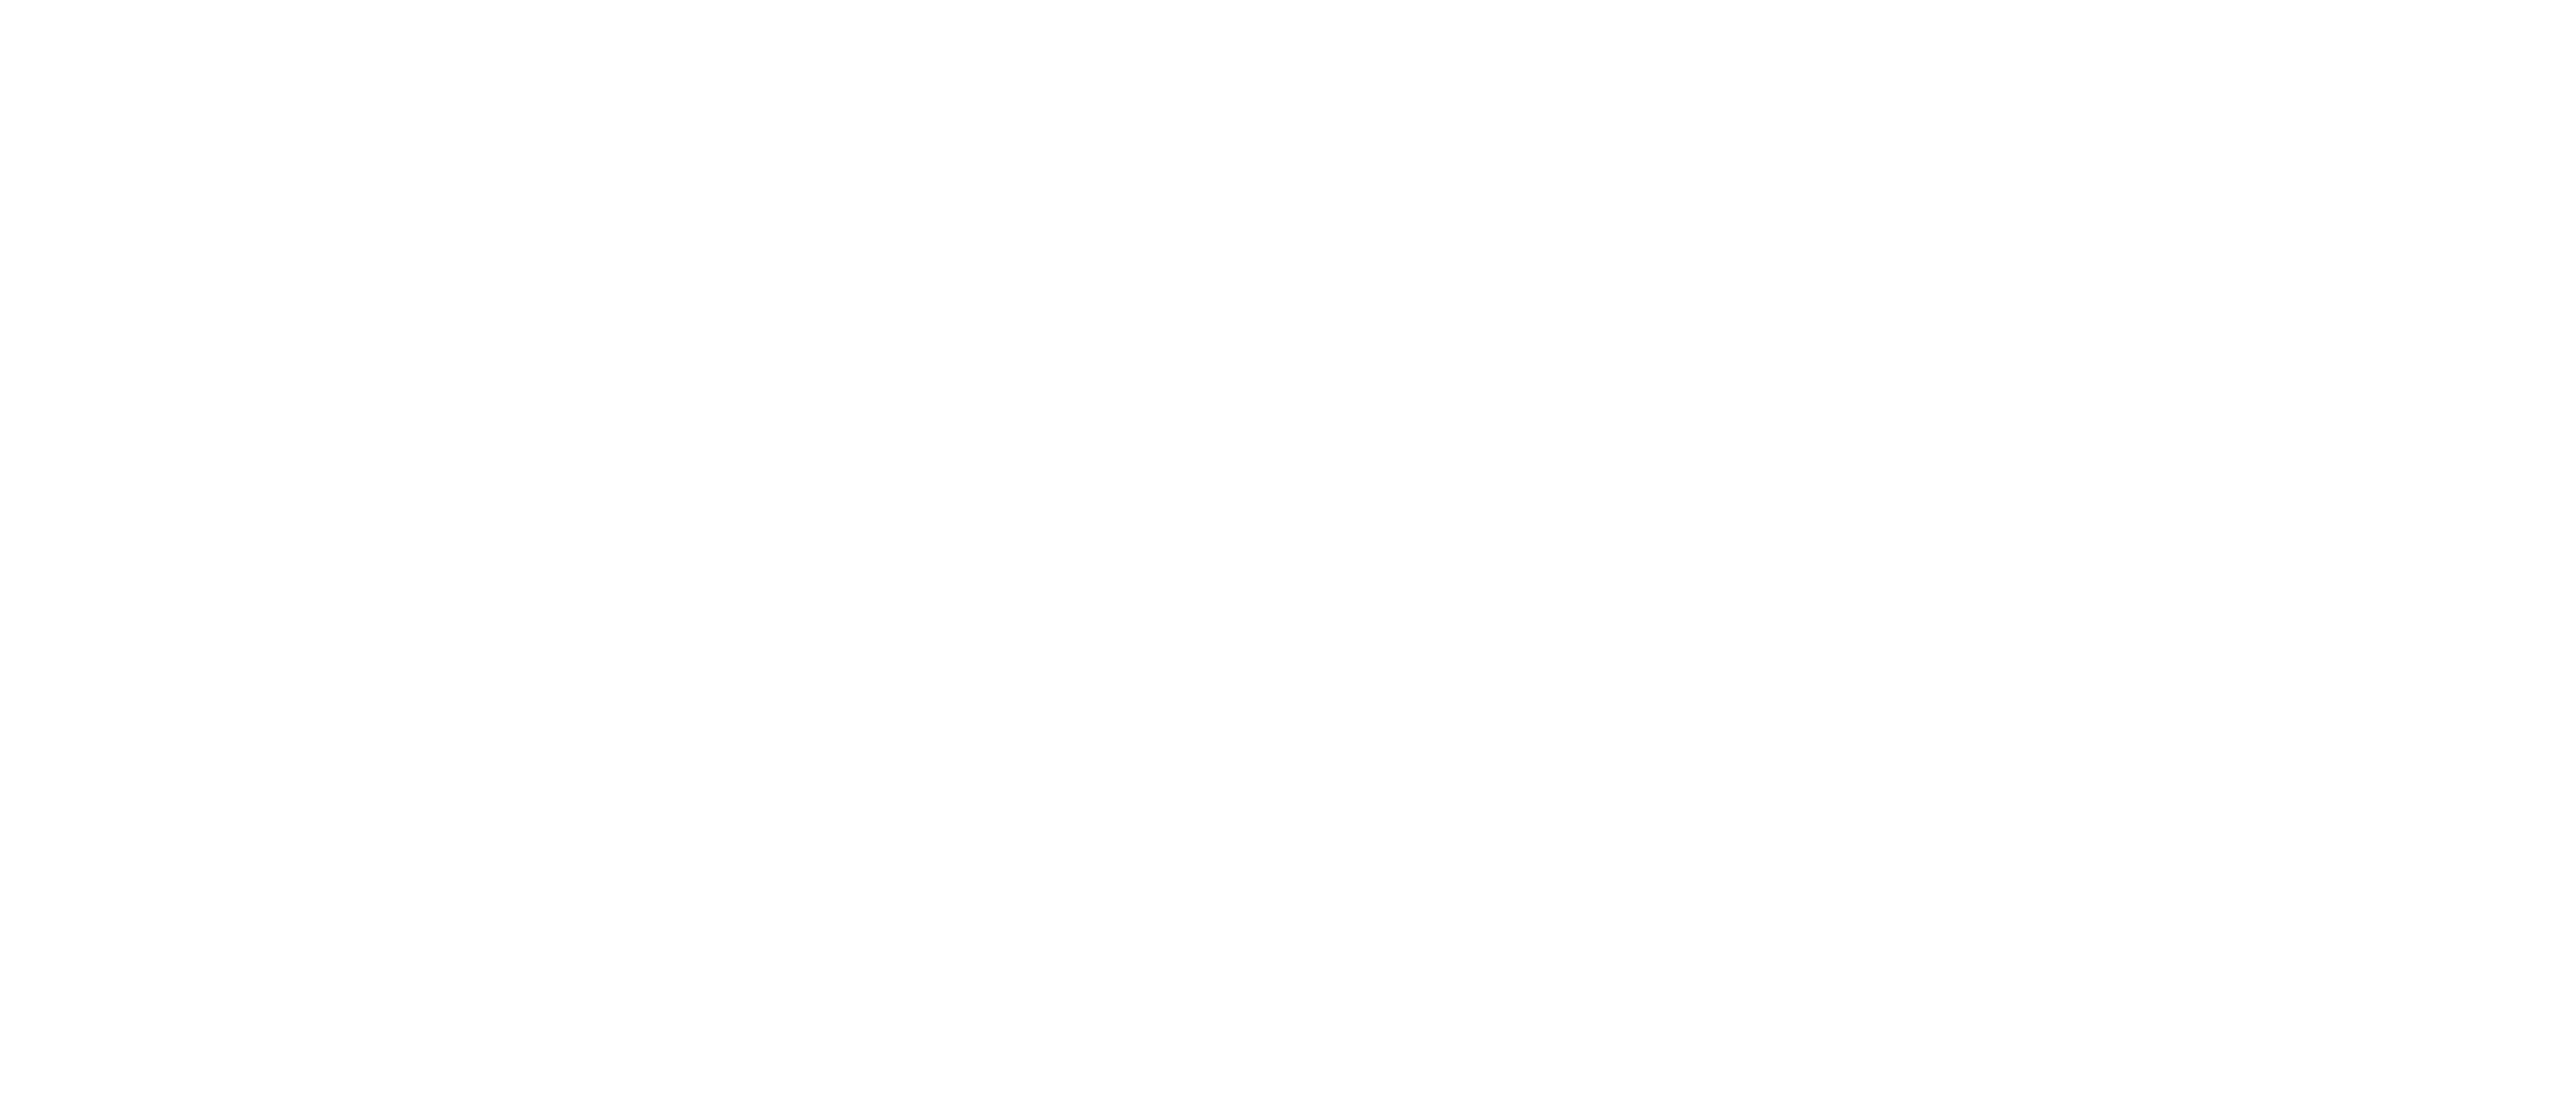 Microsoft Solutions Partner for Business Applications